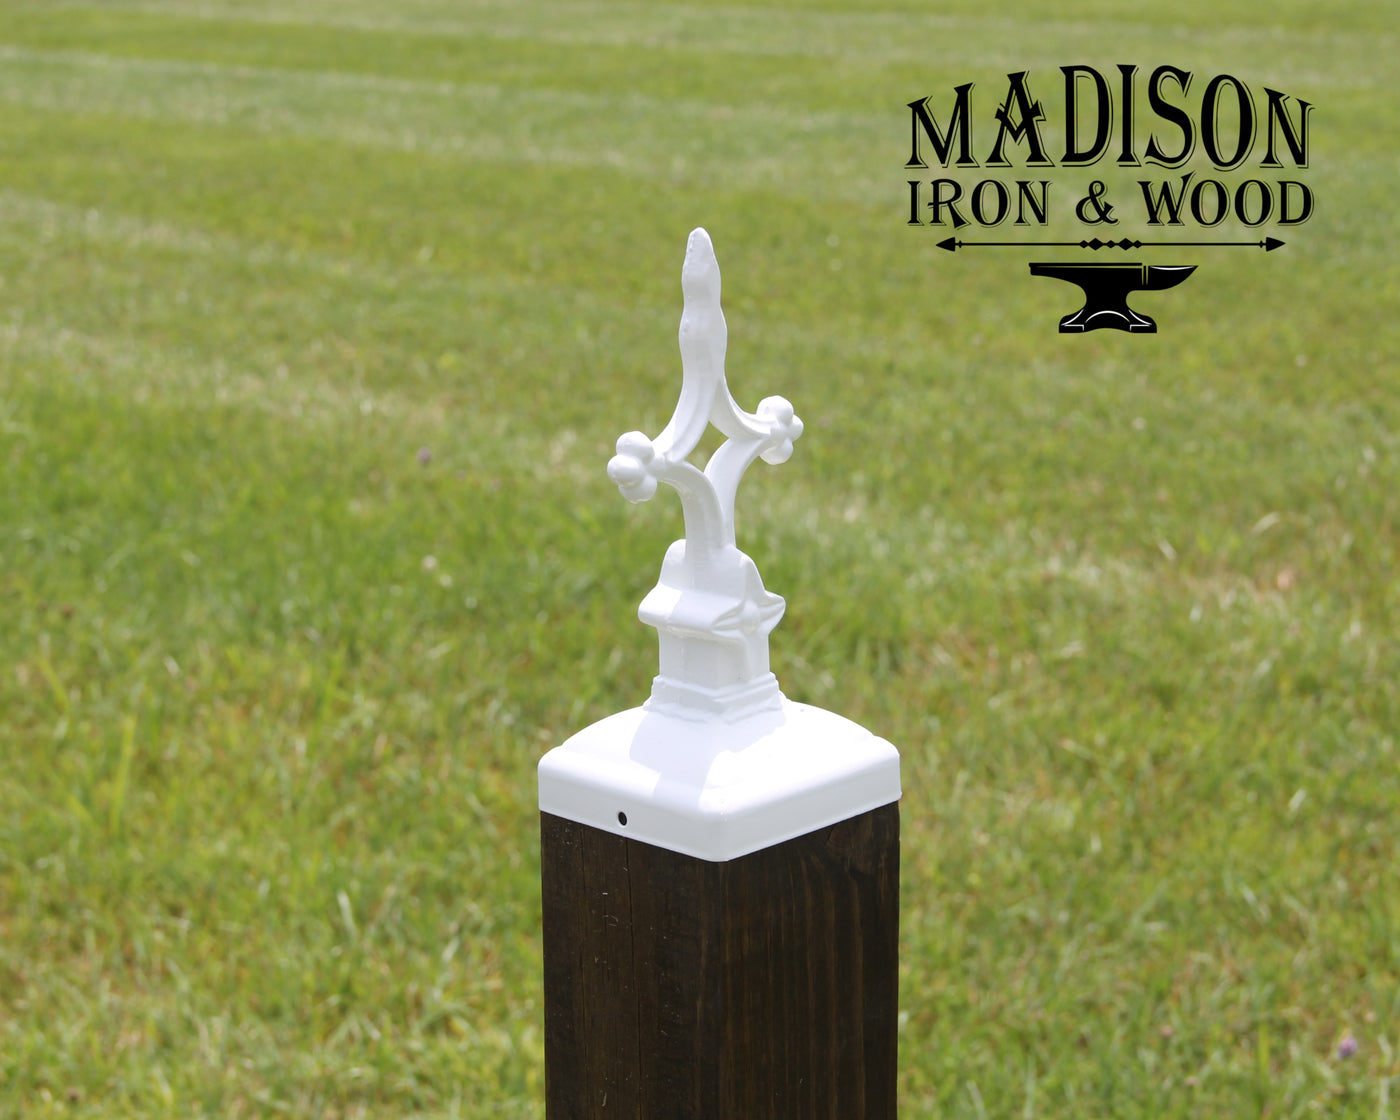 4x4 Cross Post Cap - Madison Iron and Wood - Post Cap - metal outdoor decor - Steel deocrations - american made products - veteran owned business products - fencing decorations - fencing supplies - custom wall decorations - personalized wall signs - steel - decorative post caps - steel post caps - metal post caps - brackets - structural brackets - home improvement - easter - easter decorations - easter gift - easter yard decor